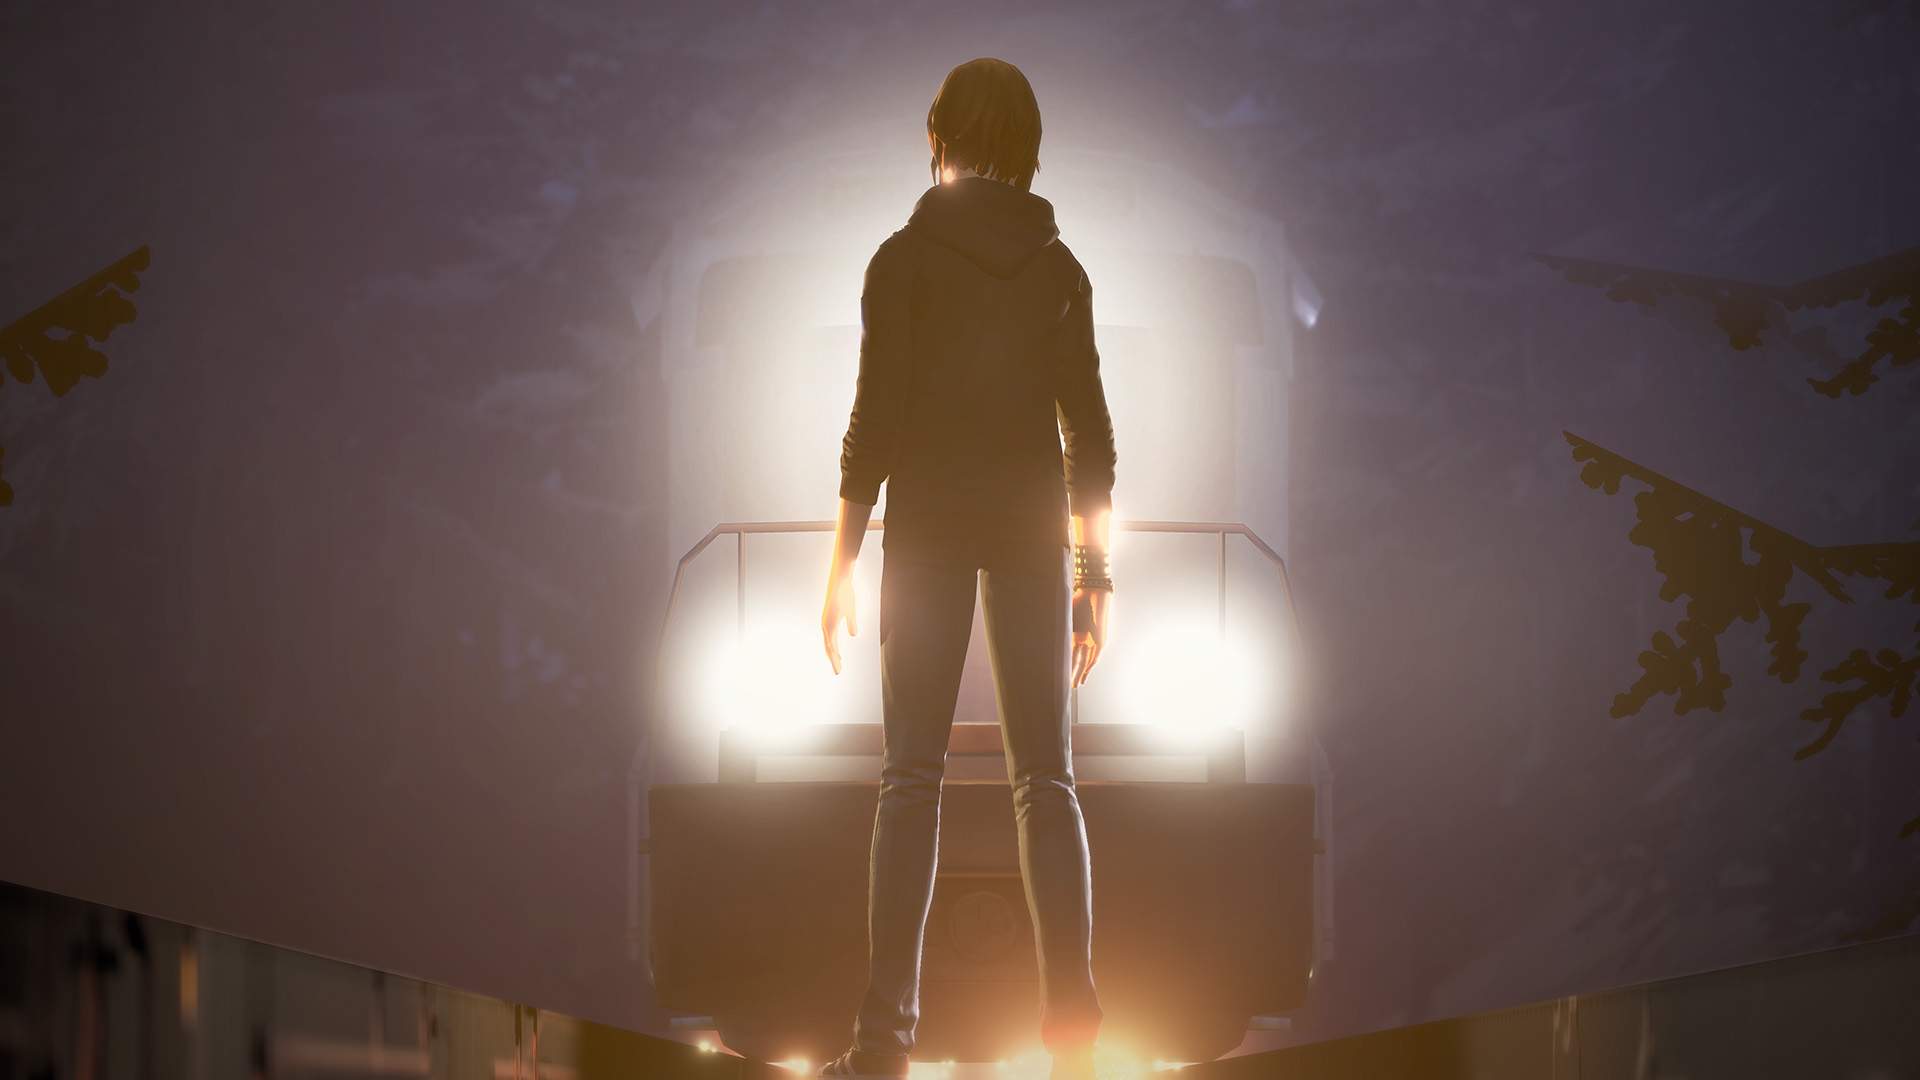 Lit by the headlamps of an oncoming freight train, Chloe Price stands defiant in the middle of the tracks.